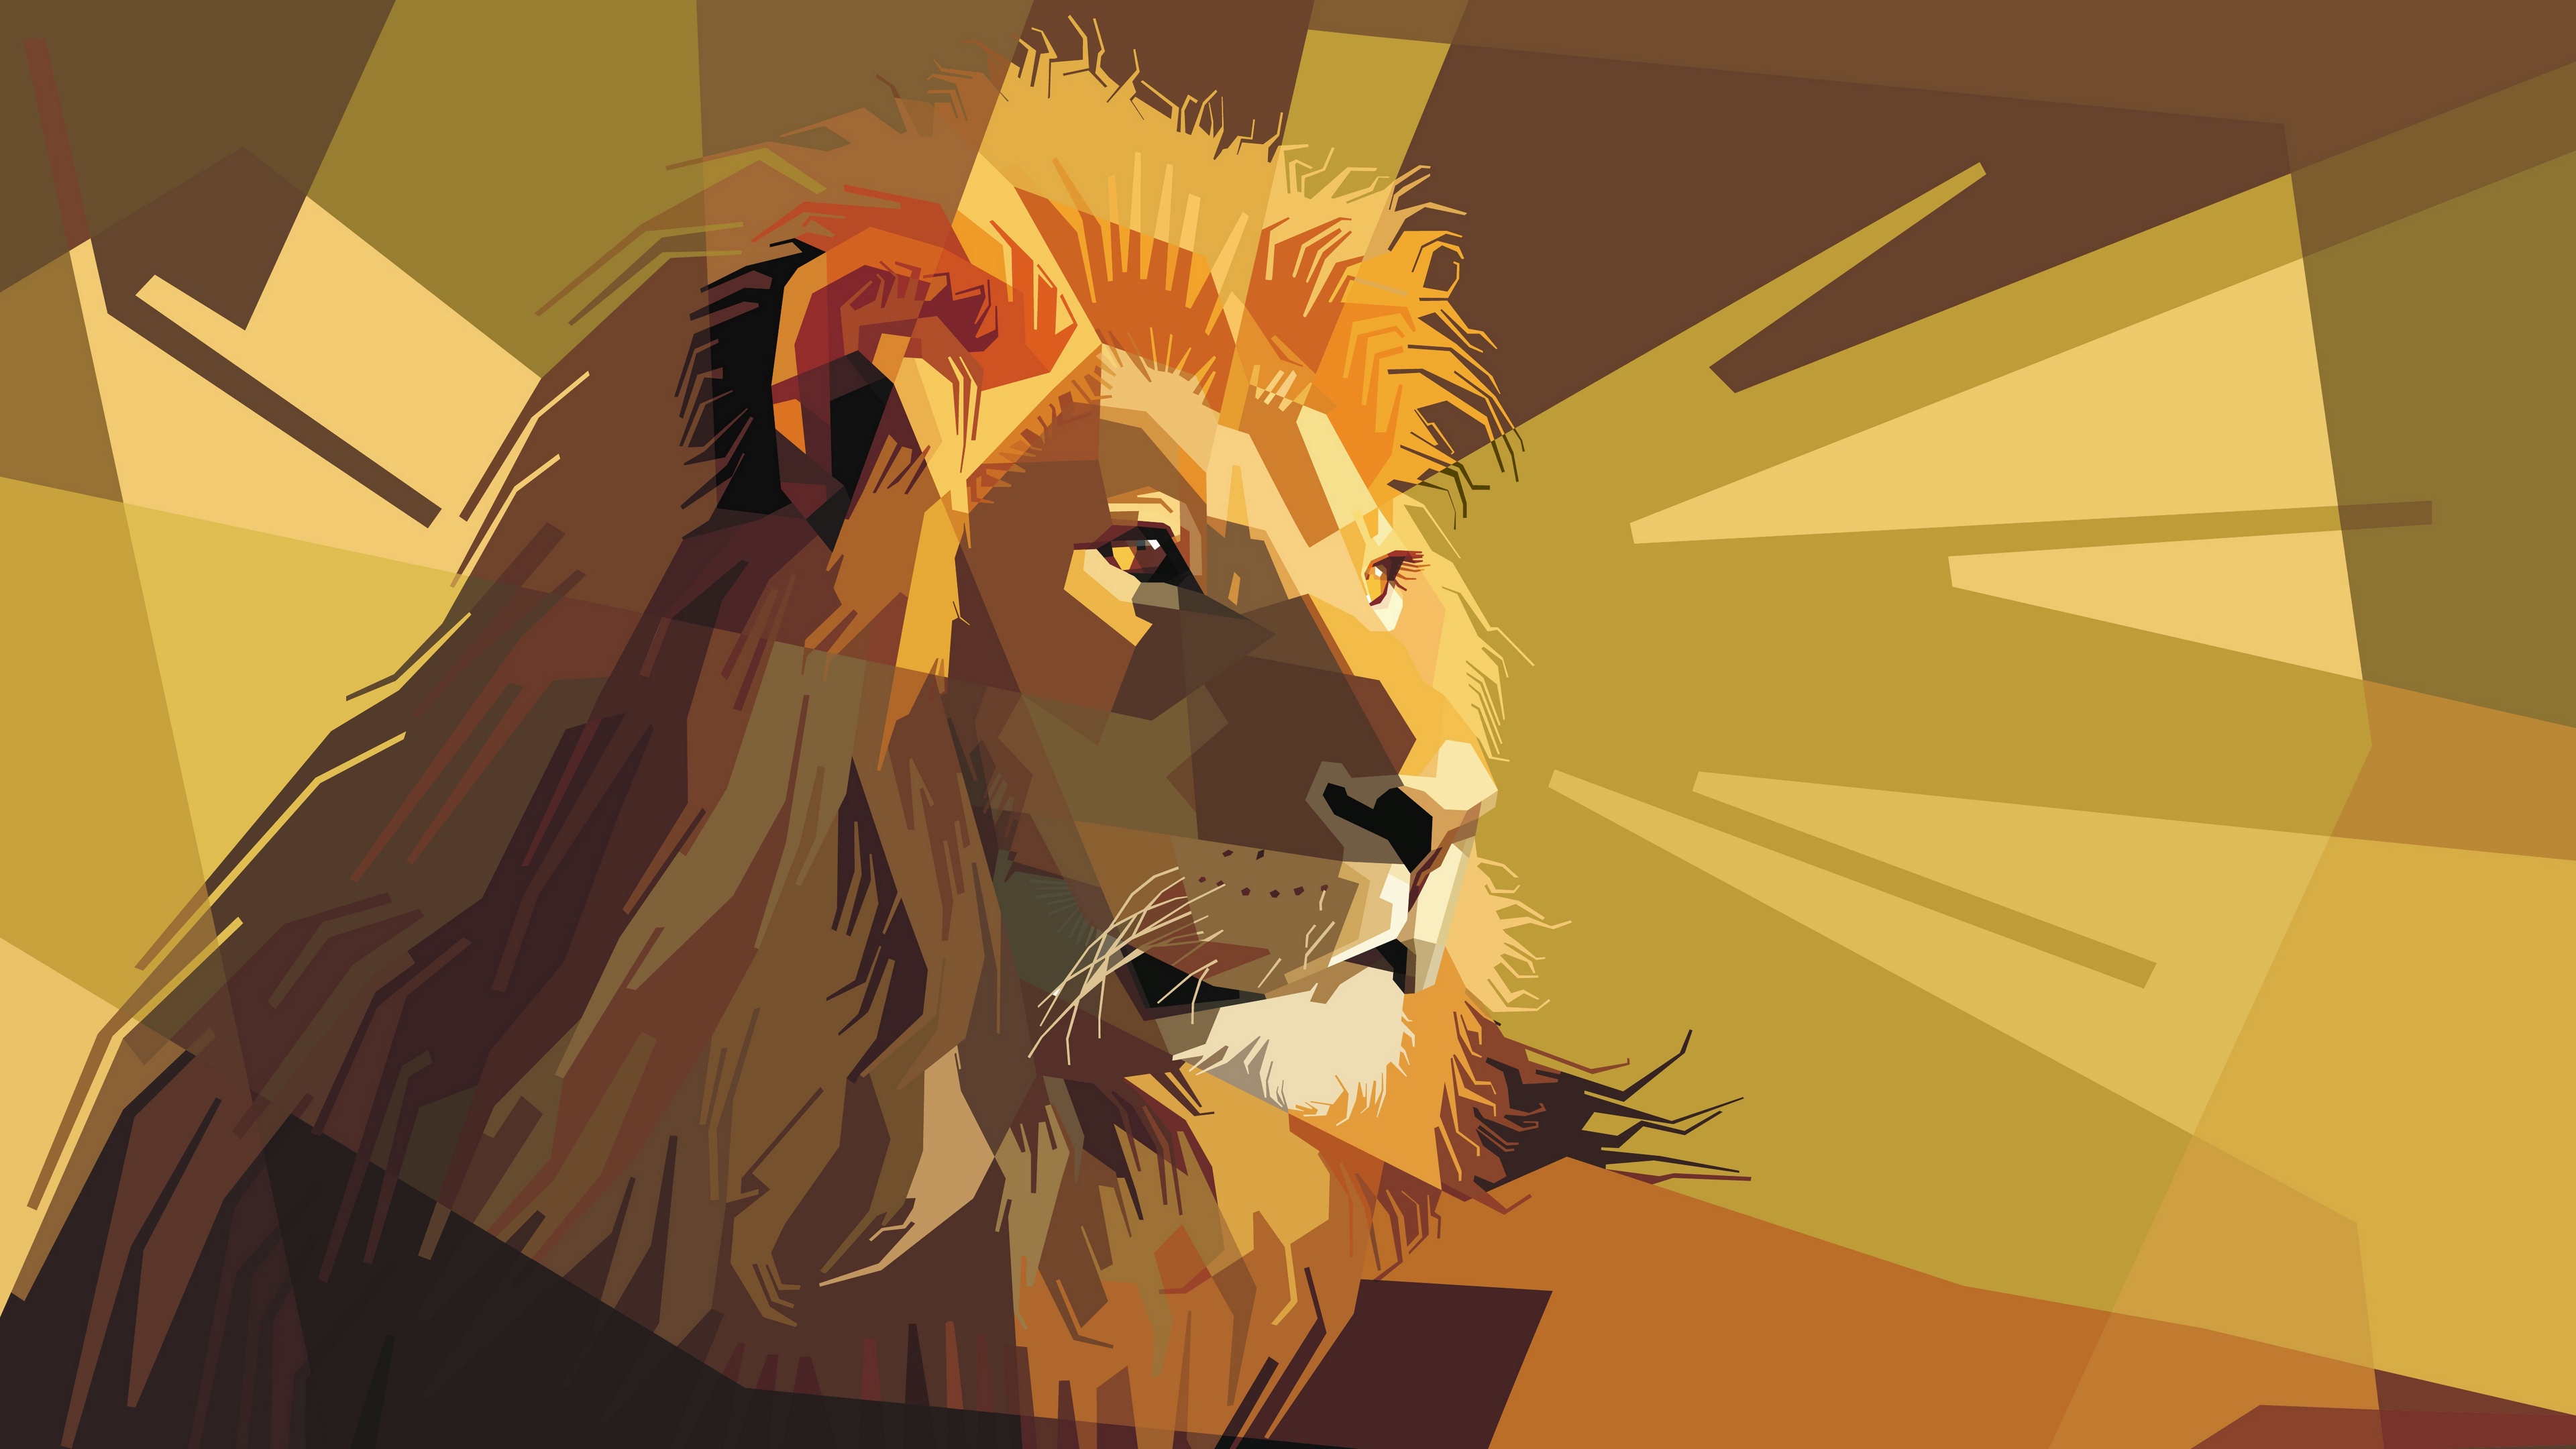 Lion 4K wallpapers for your desktop or mobile screen free and easy to  download